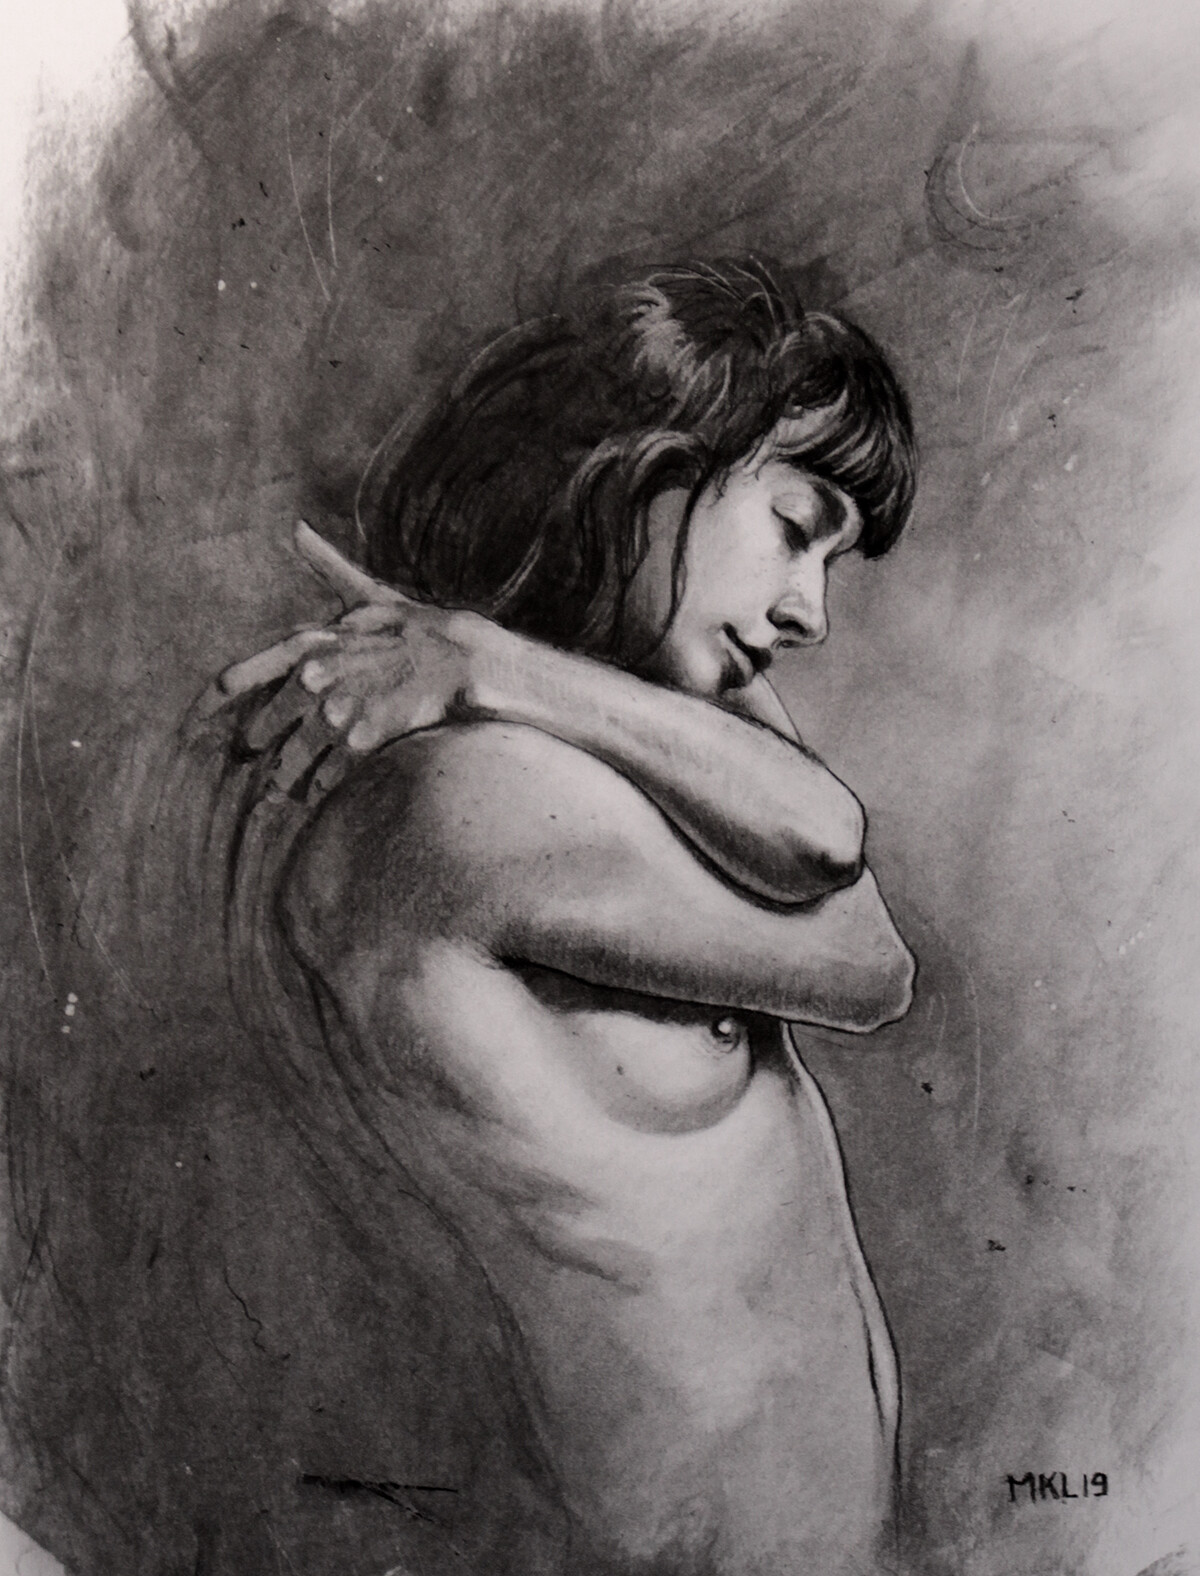 Another charcoal study